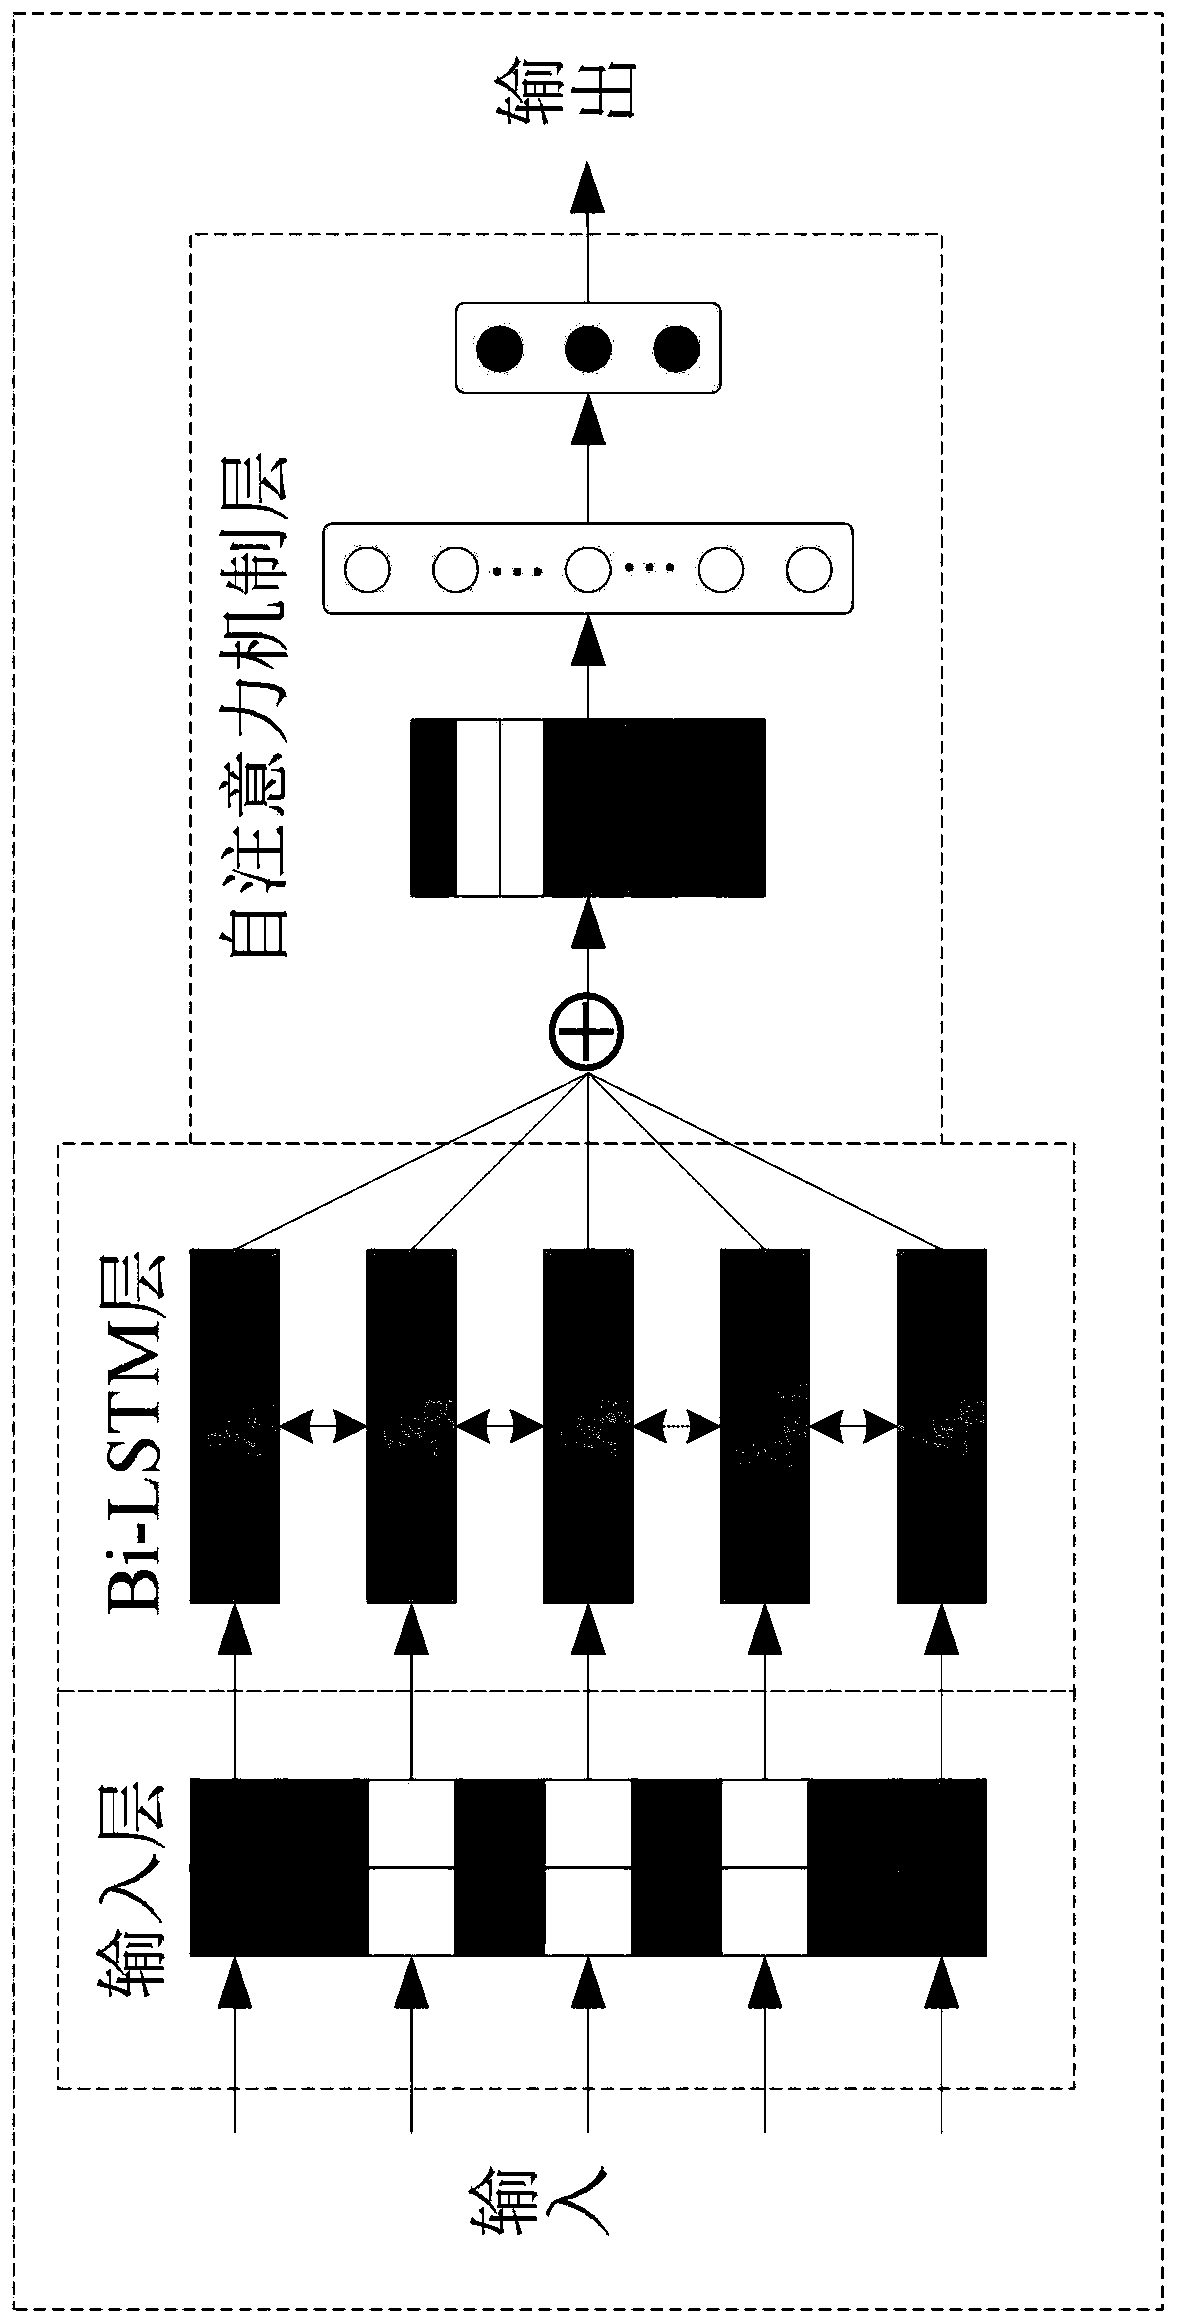 Chinese tourism field named entity identification method based on graph convolution neural network